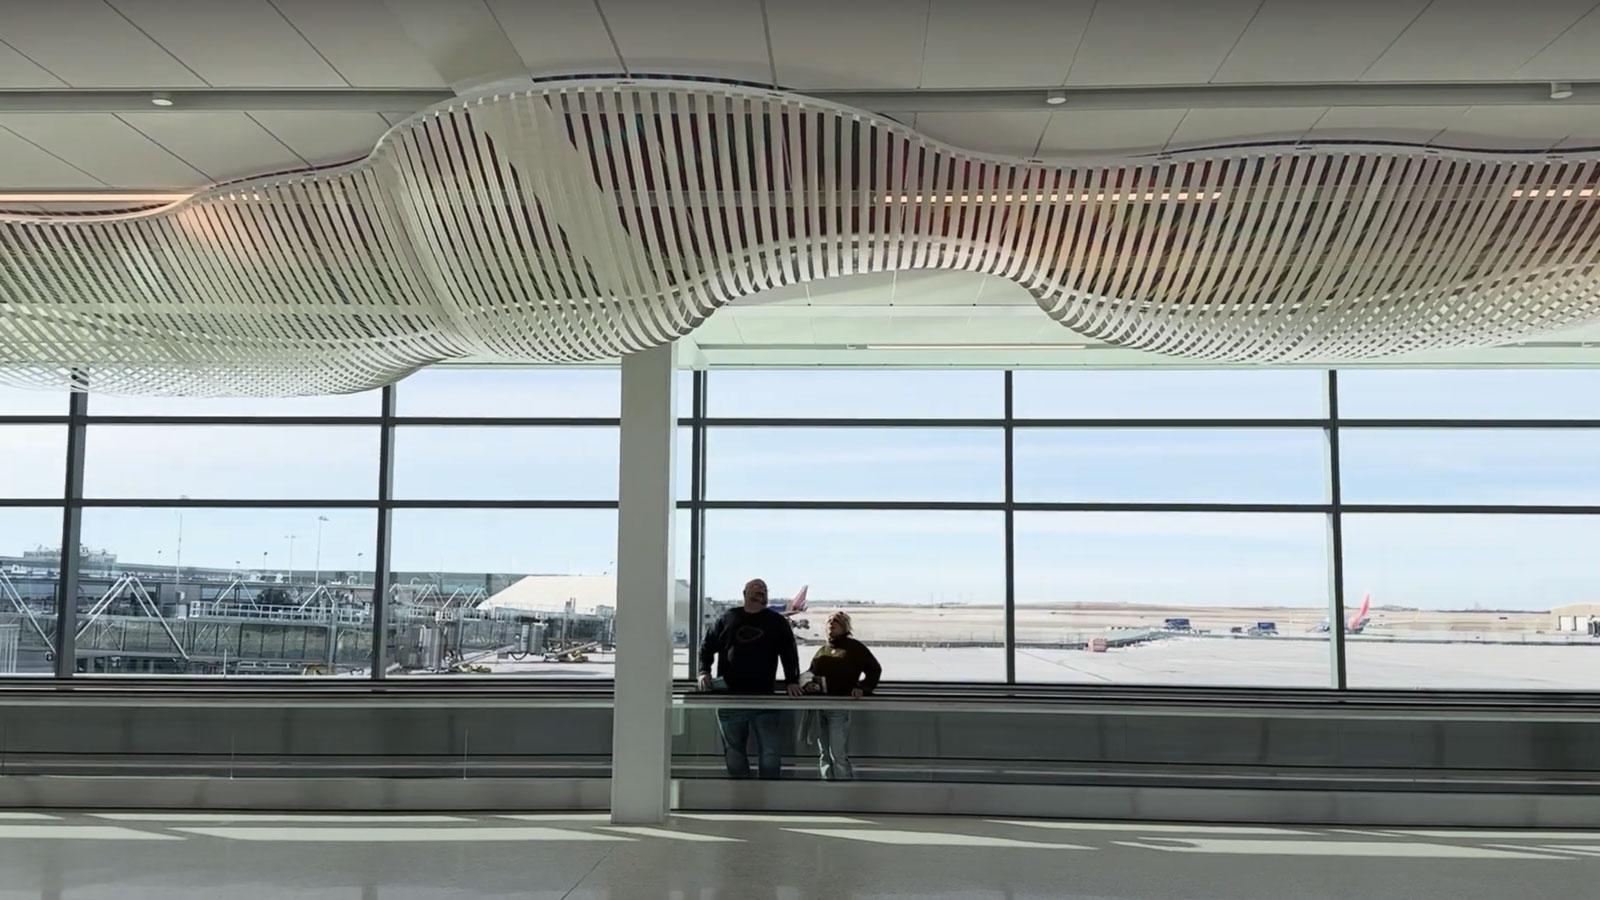 KCI terminal interior with art and passengers at window